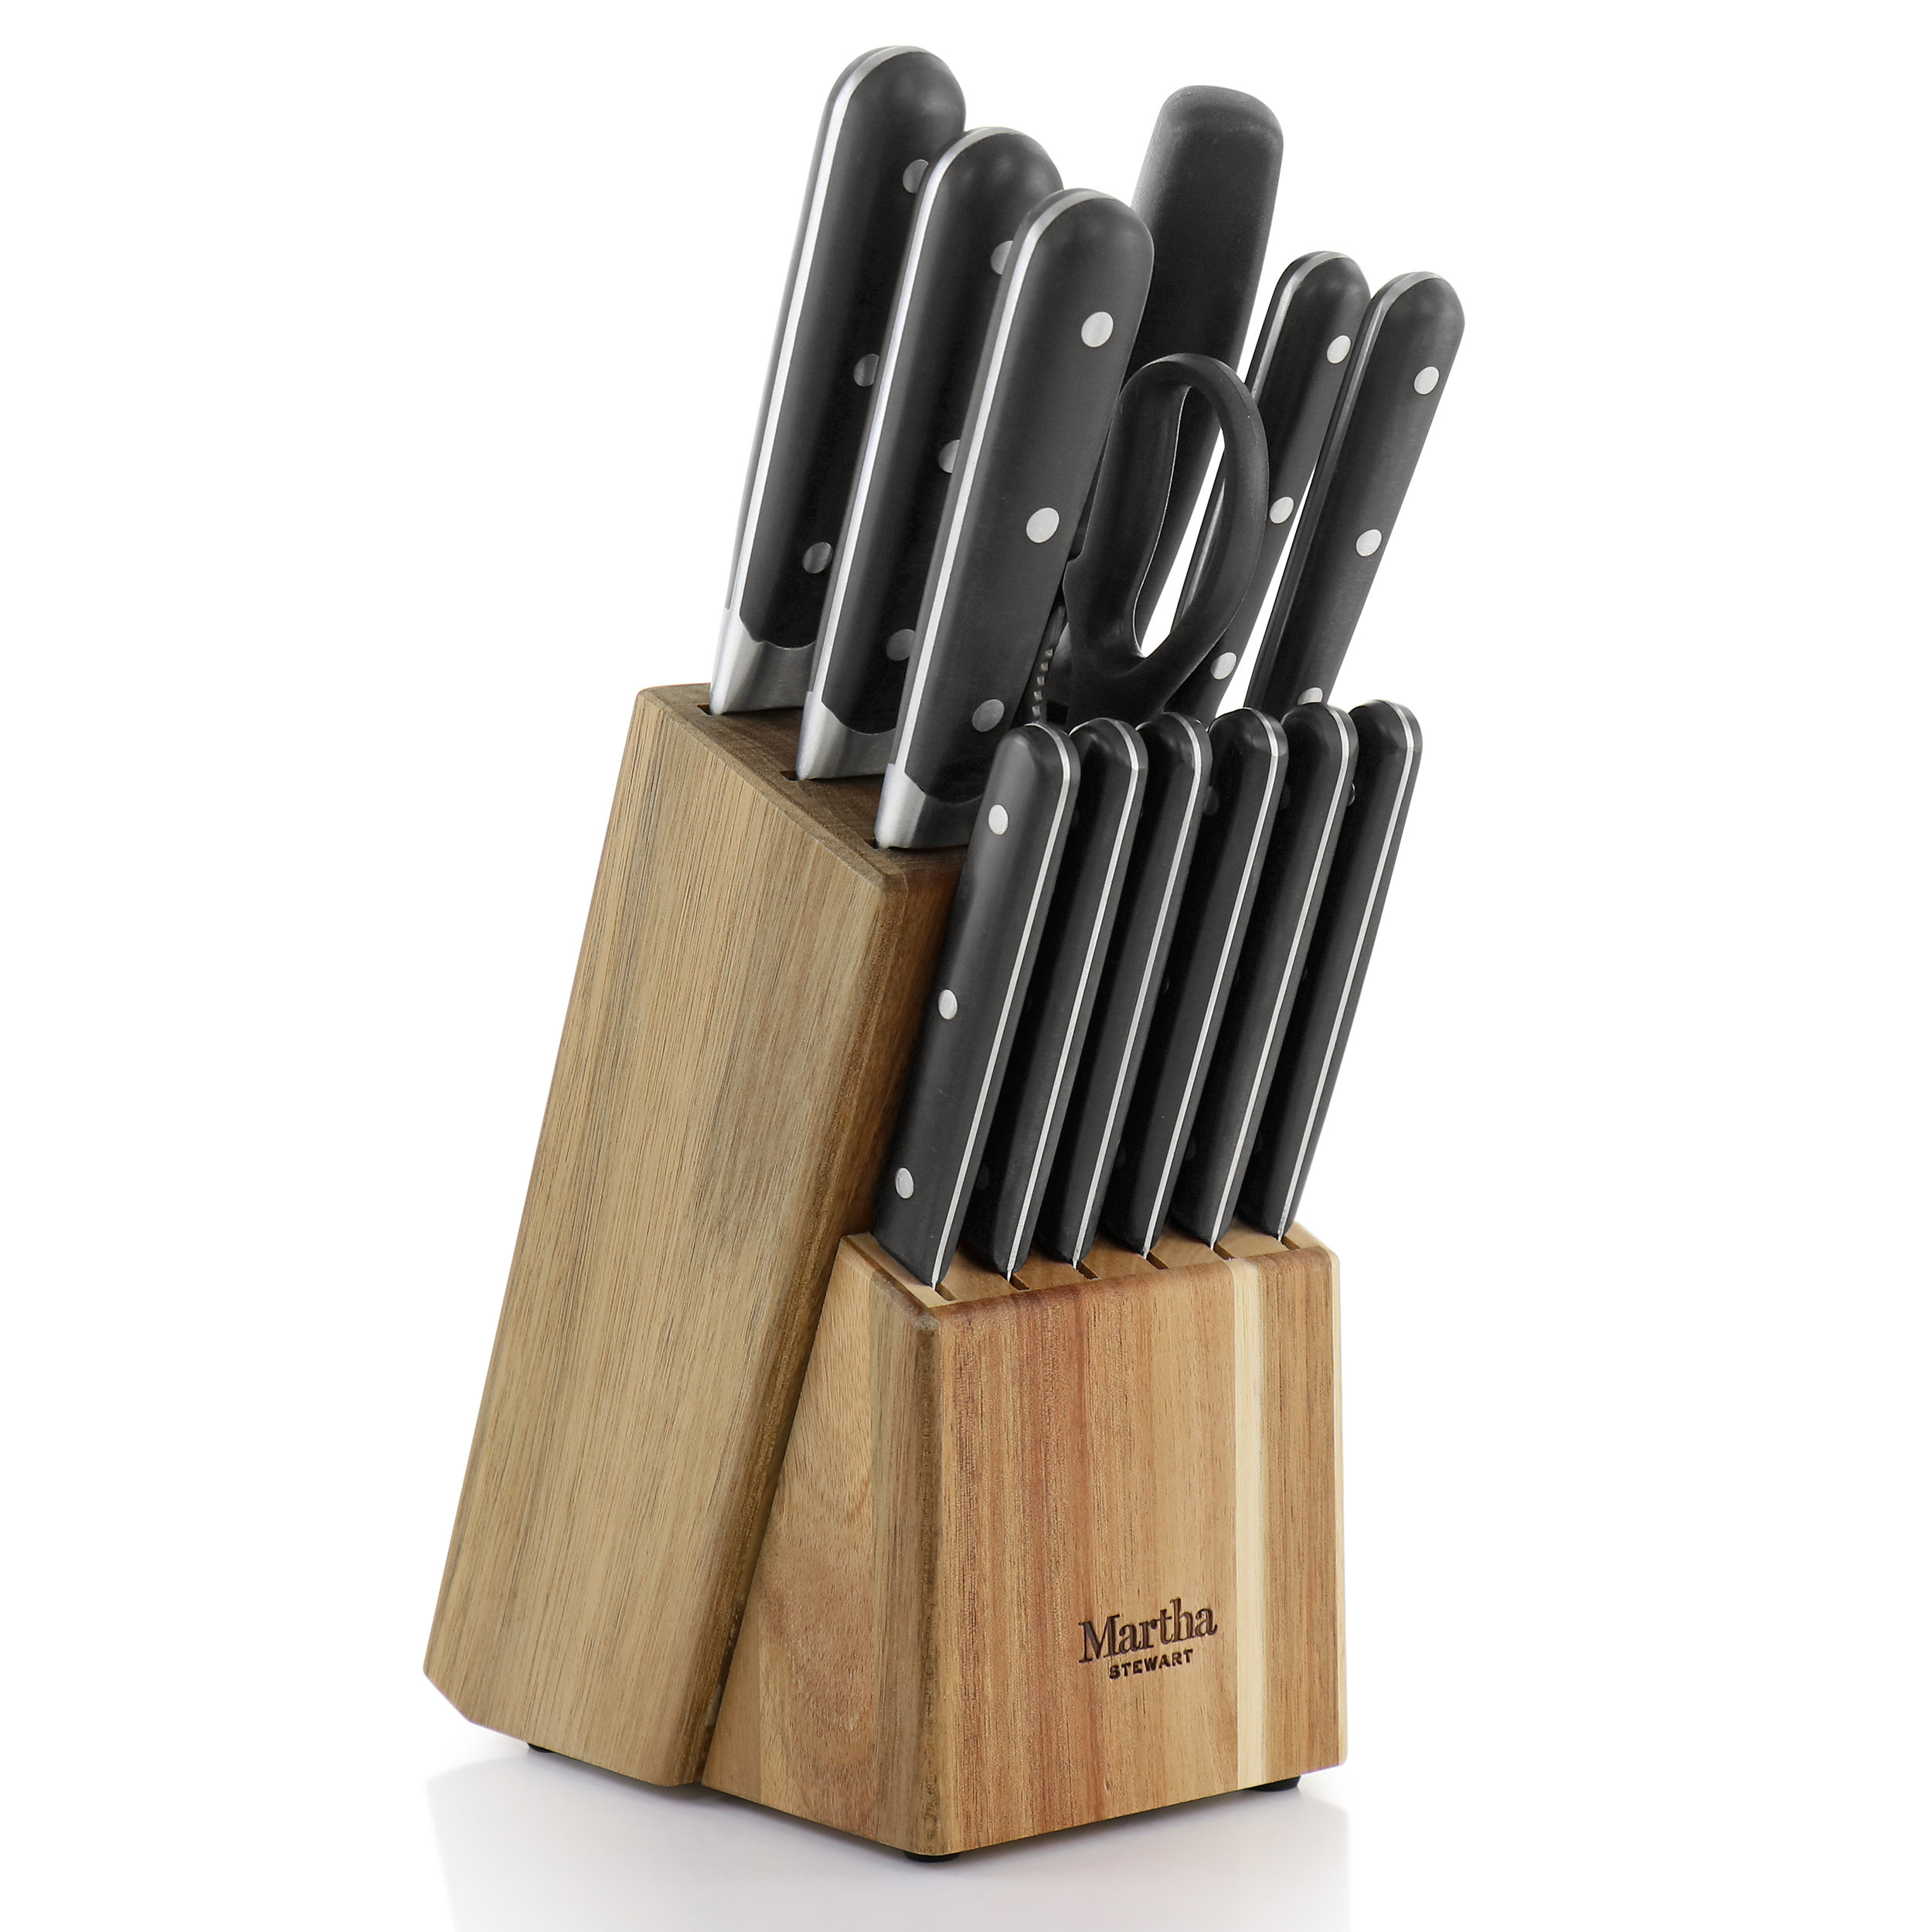 Rustic Farmhouse 14-Piece High Carbon Stainless Steel Knife and Block Set